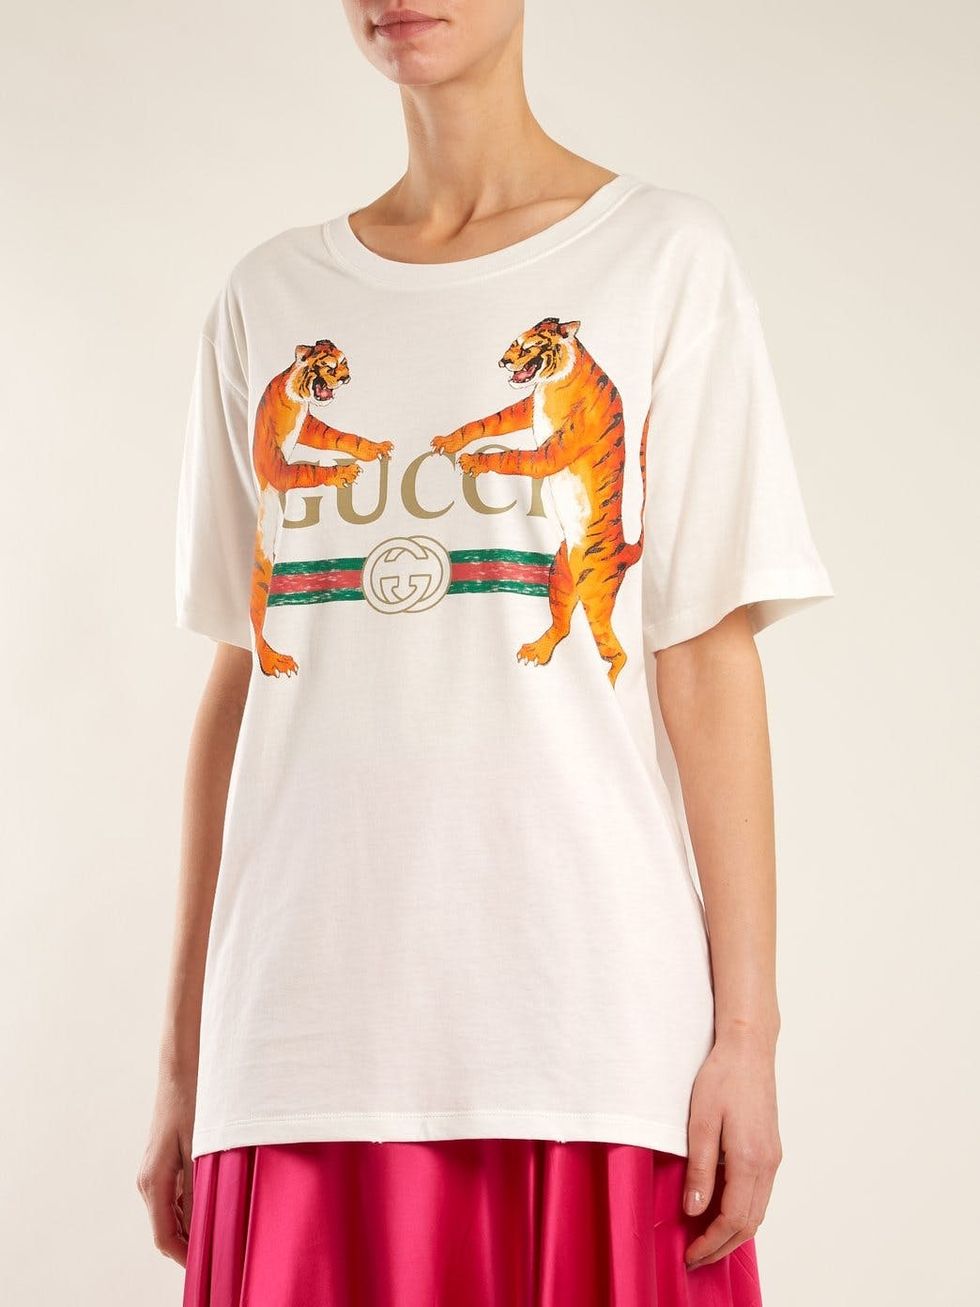 23 Graphic T-Shirts That Will Get You Through Summer - Brit + Co